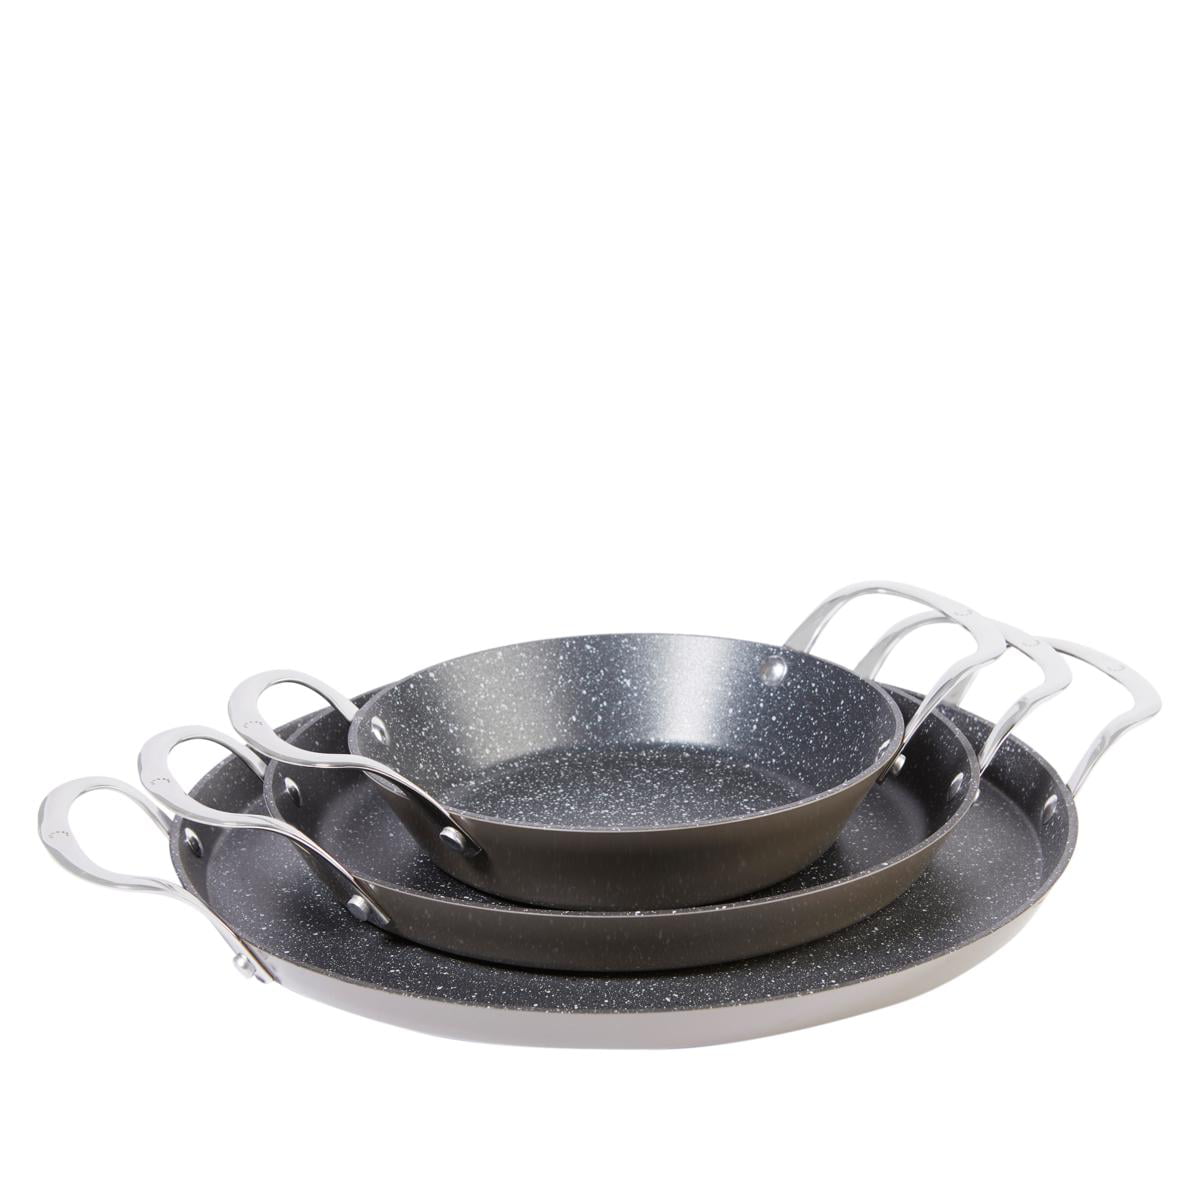 Curtis Stone Dura-Pan All-in-One Pan Set - 9569359